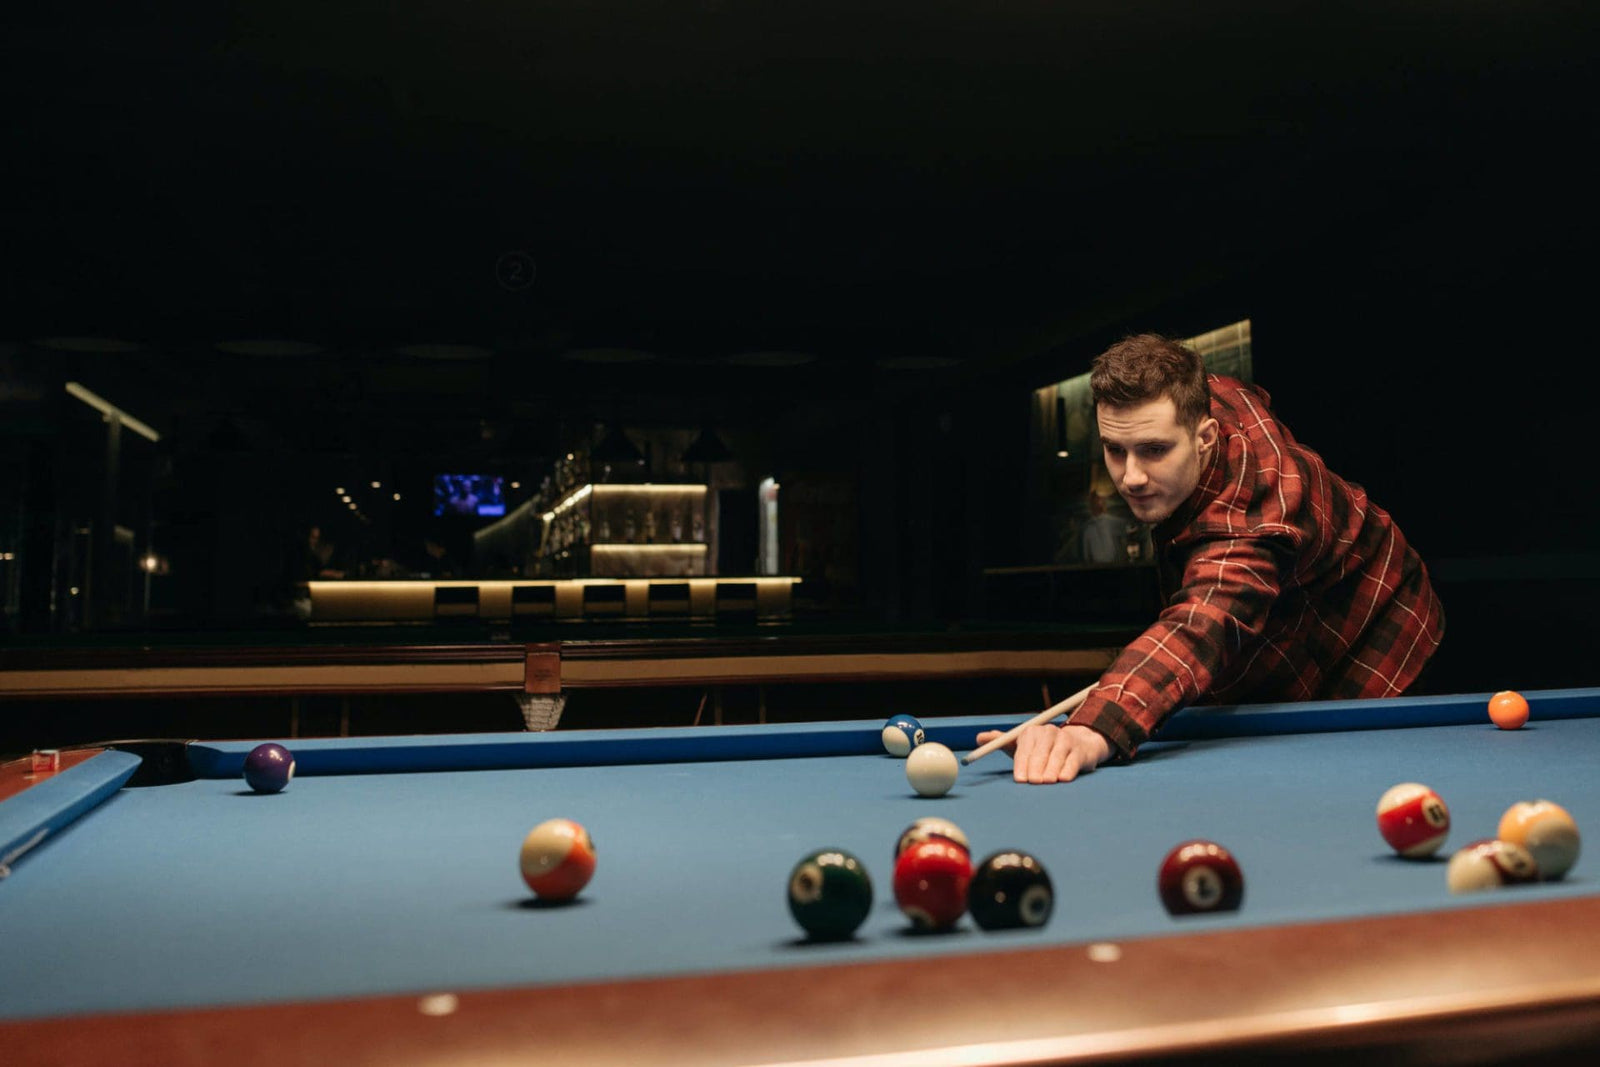 Things to consider when buying a pool table for Christmas